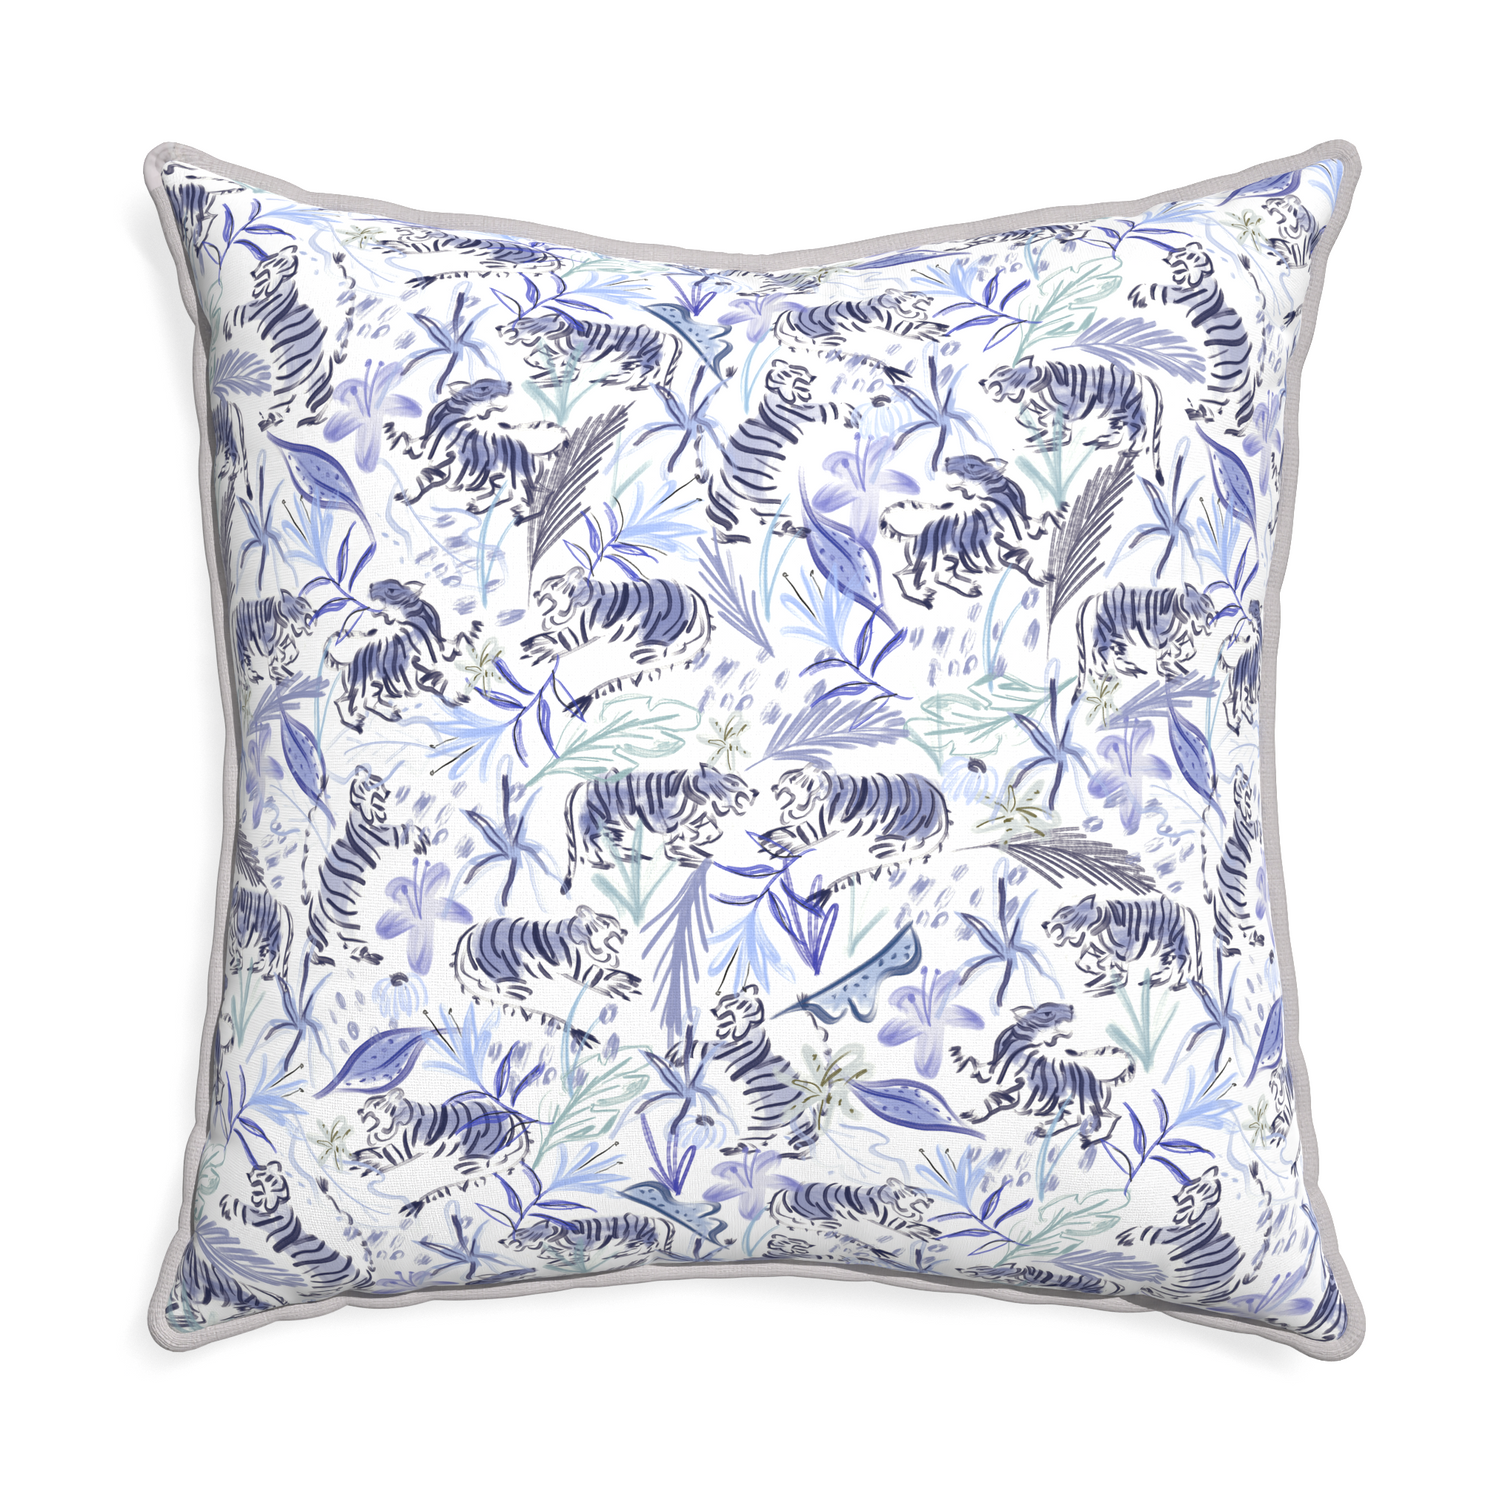 Euro-sham frida blue custom blue with intricate tiger designpillow with pebble piping on white background